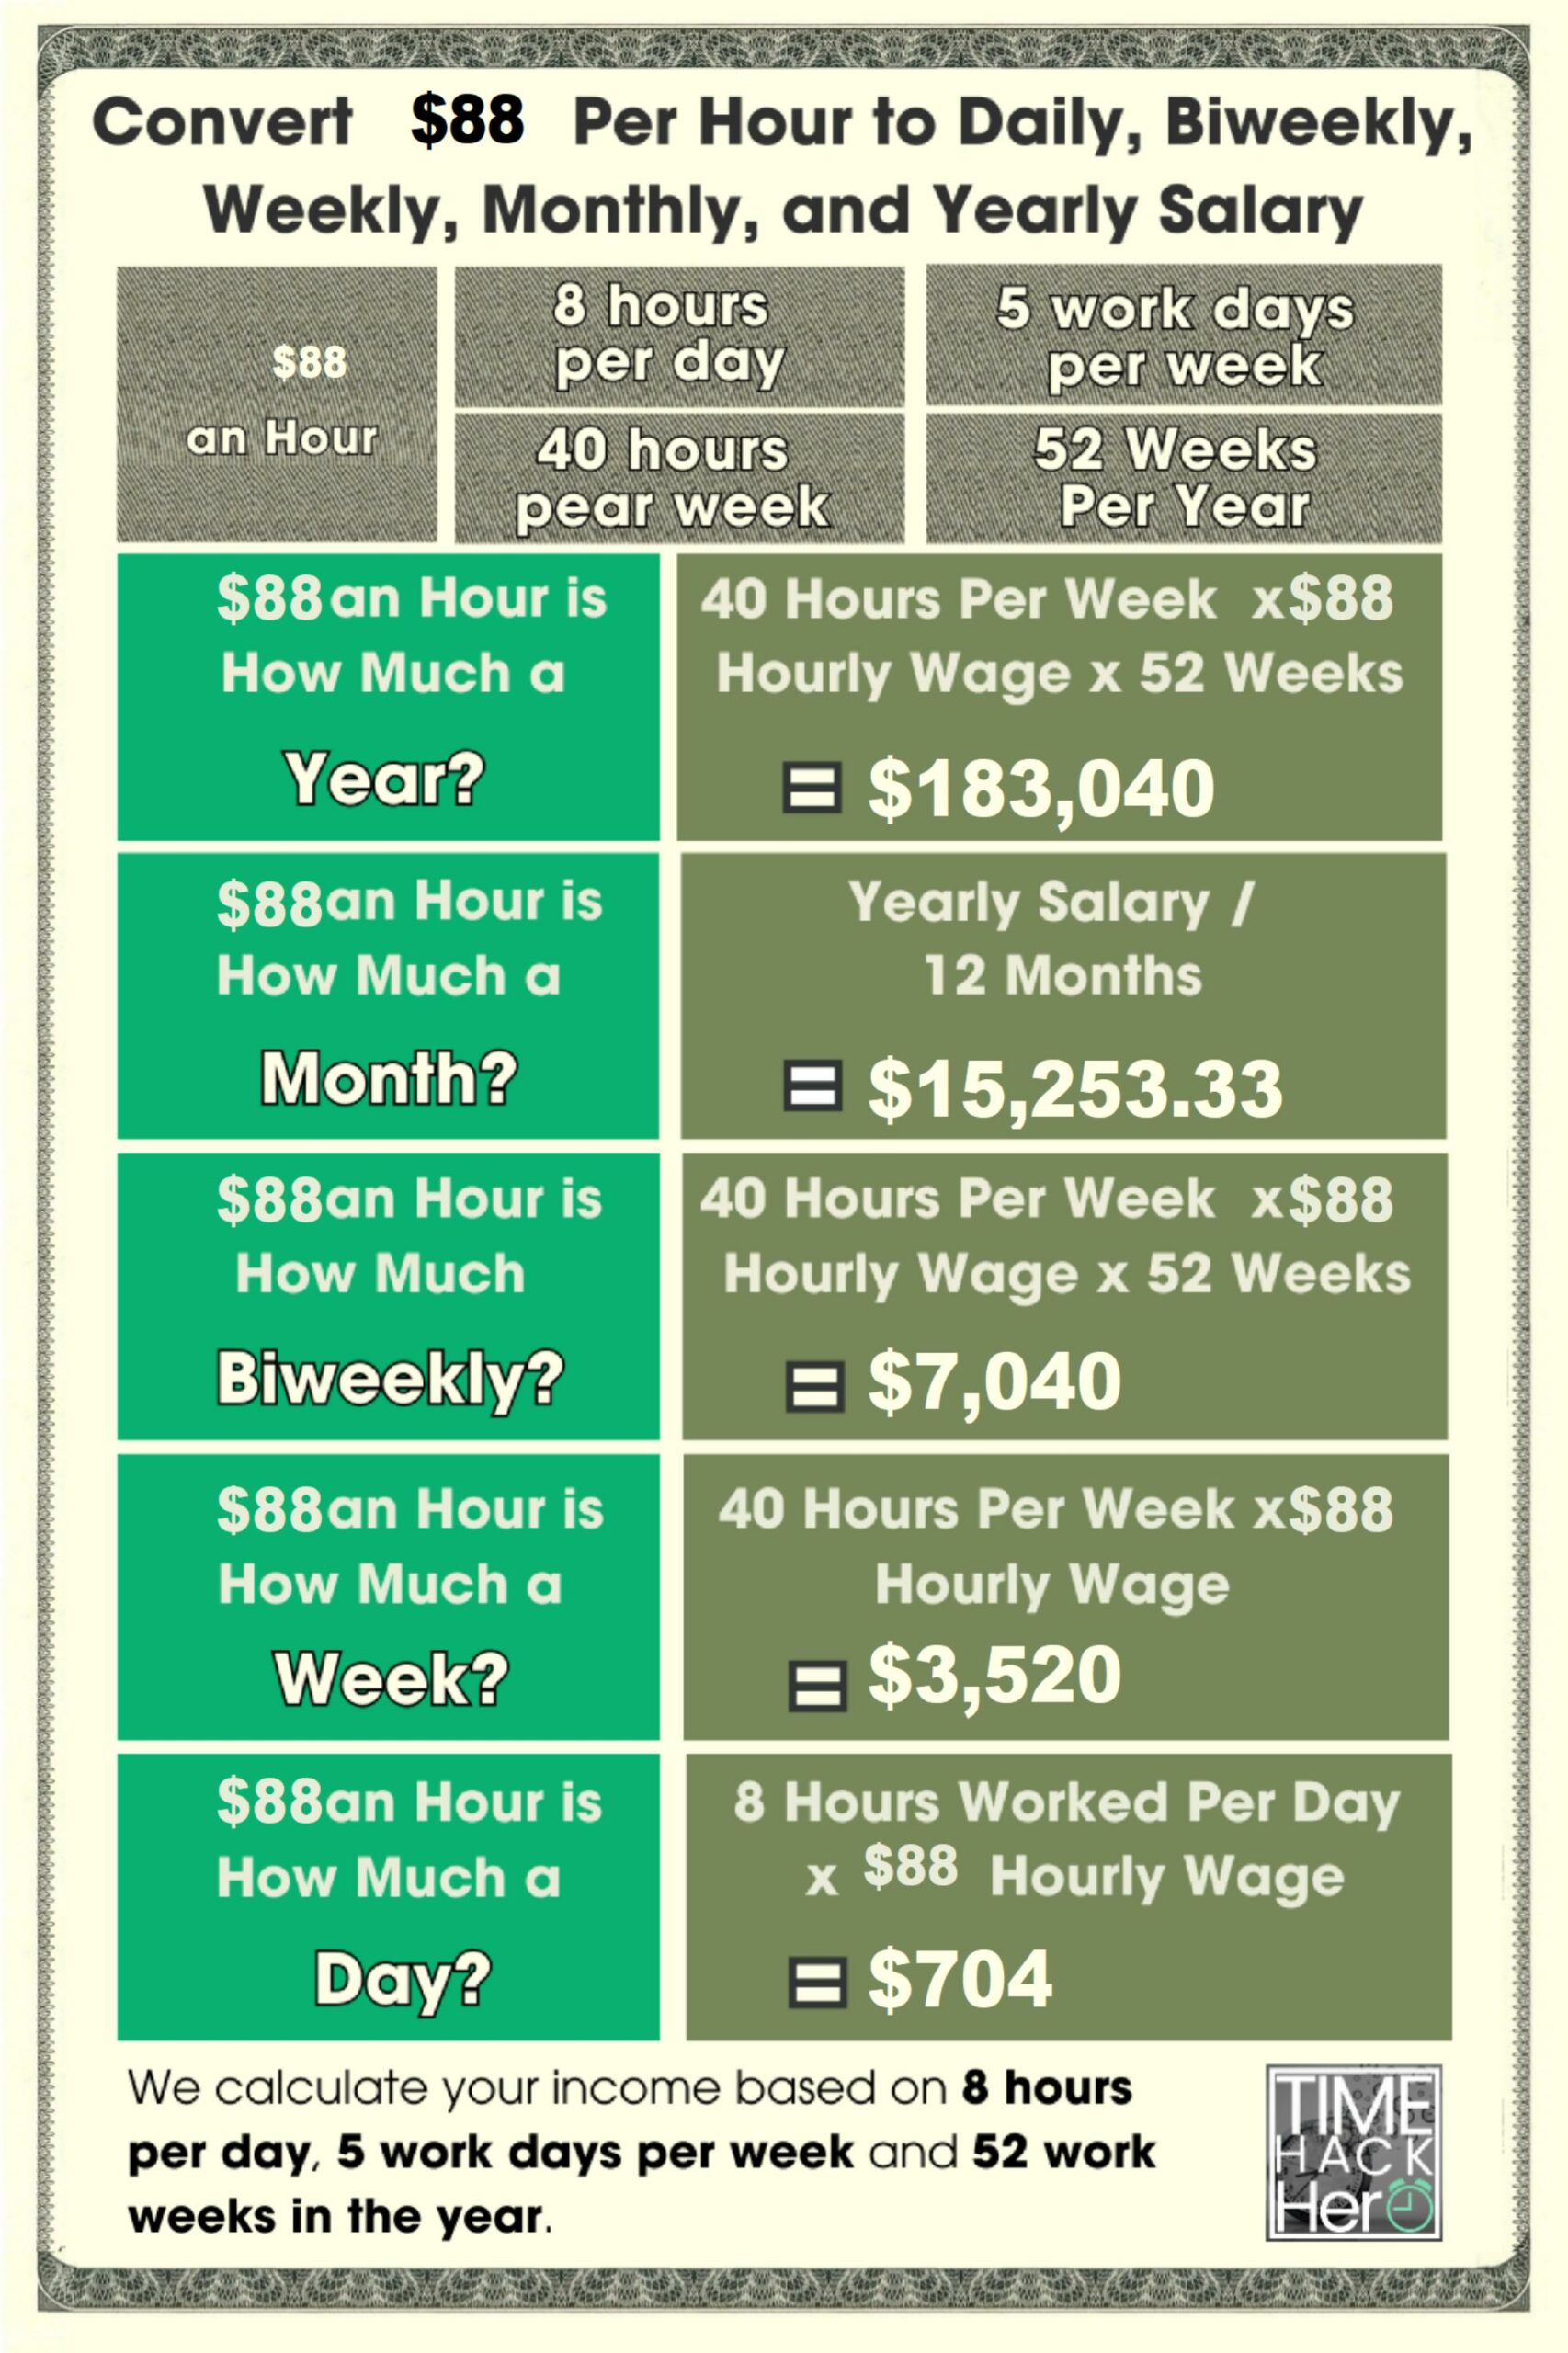 Convert $88 Per Hour to Weekly, Monthly, and Yearly Salary